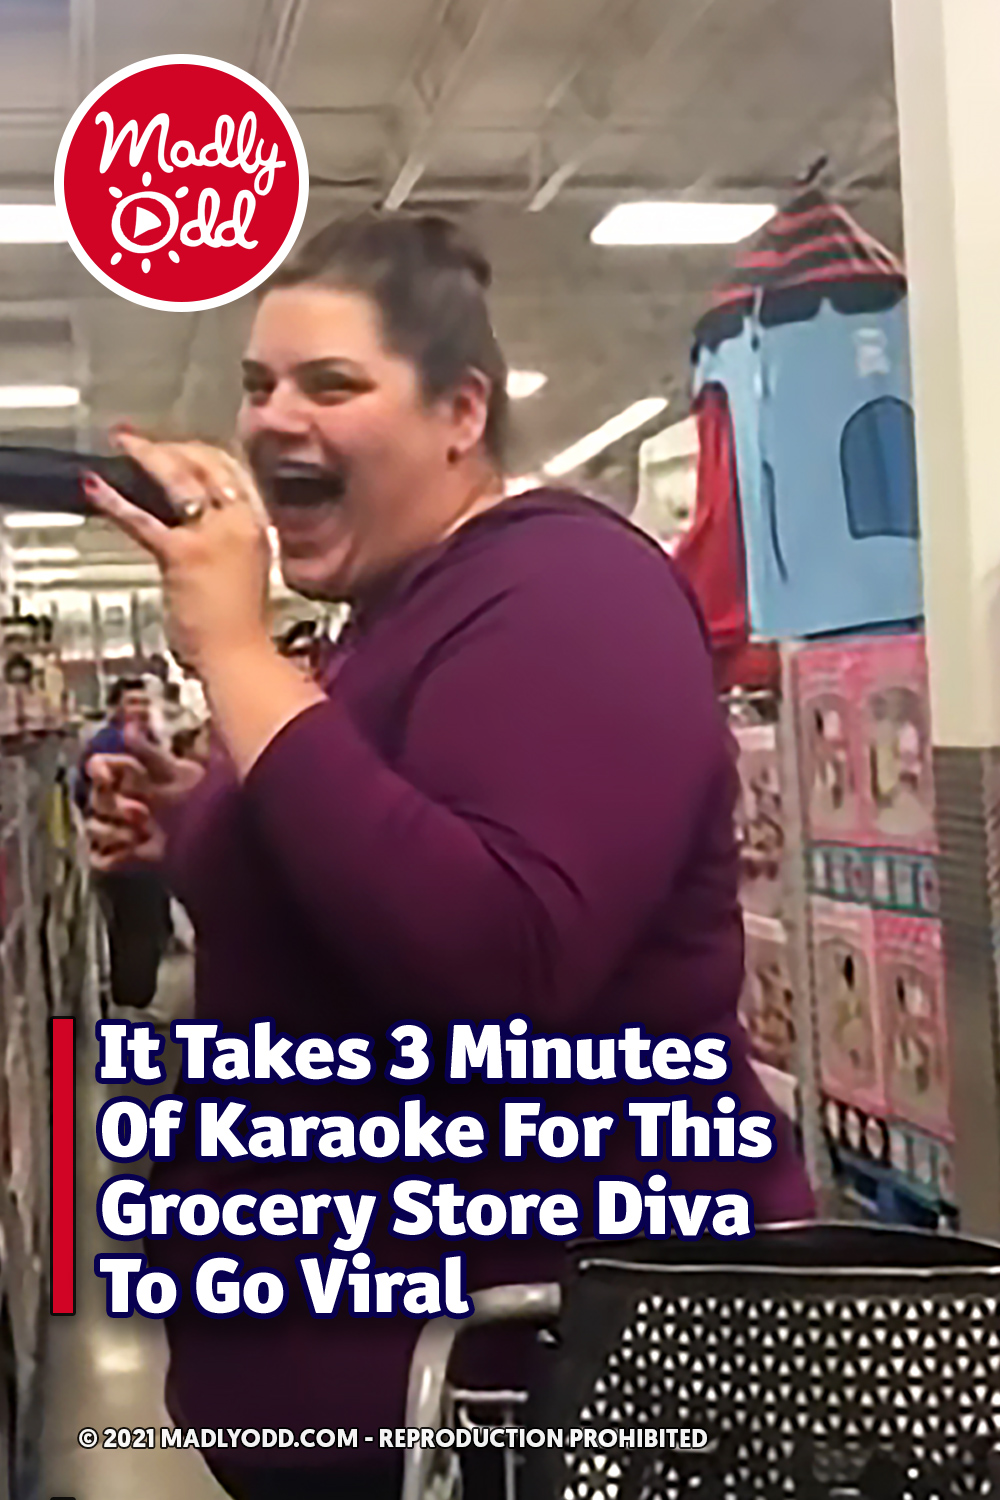 It Takes 3 Minutes Of Karaoke For This Grocery Store Diva To Go Viral